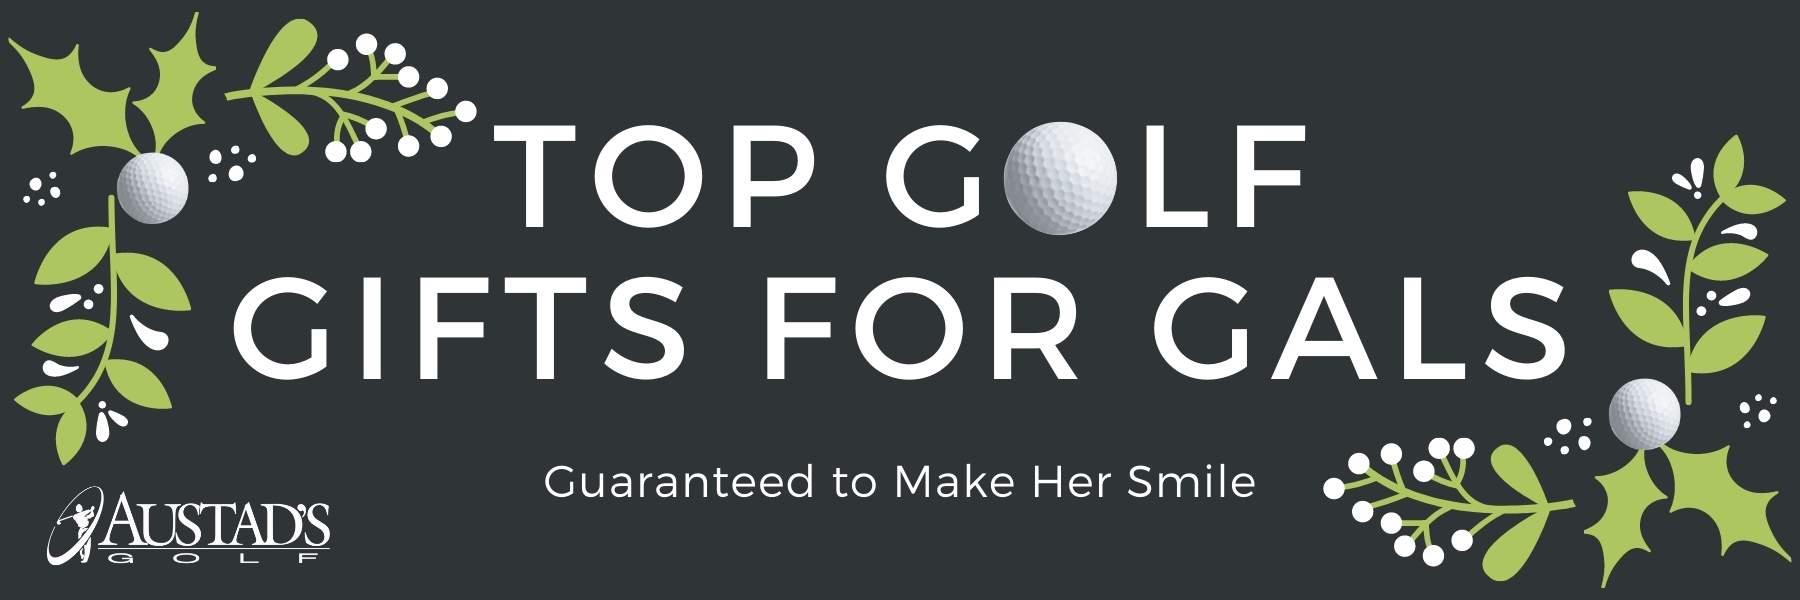 Top Golf Gifts For Women